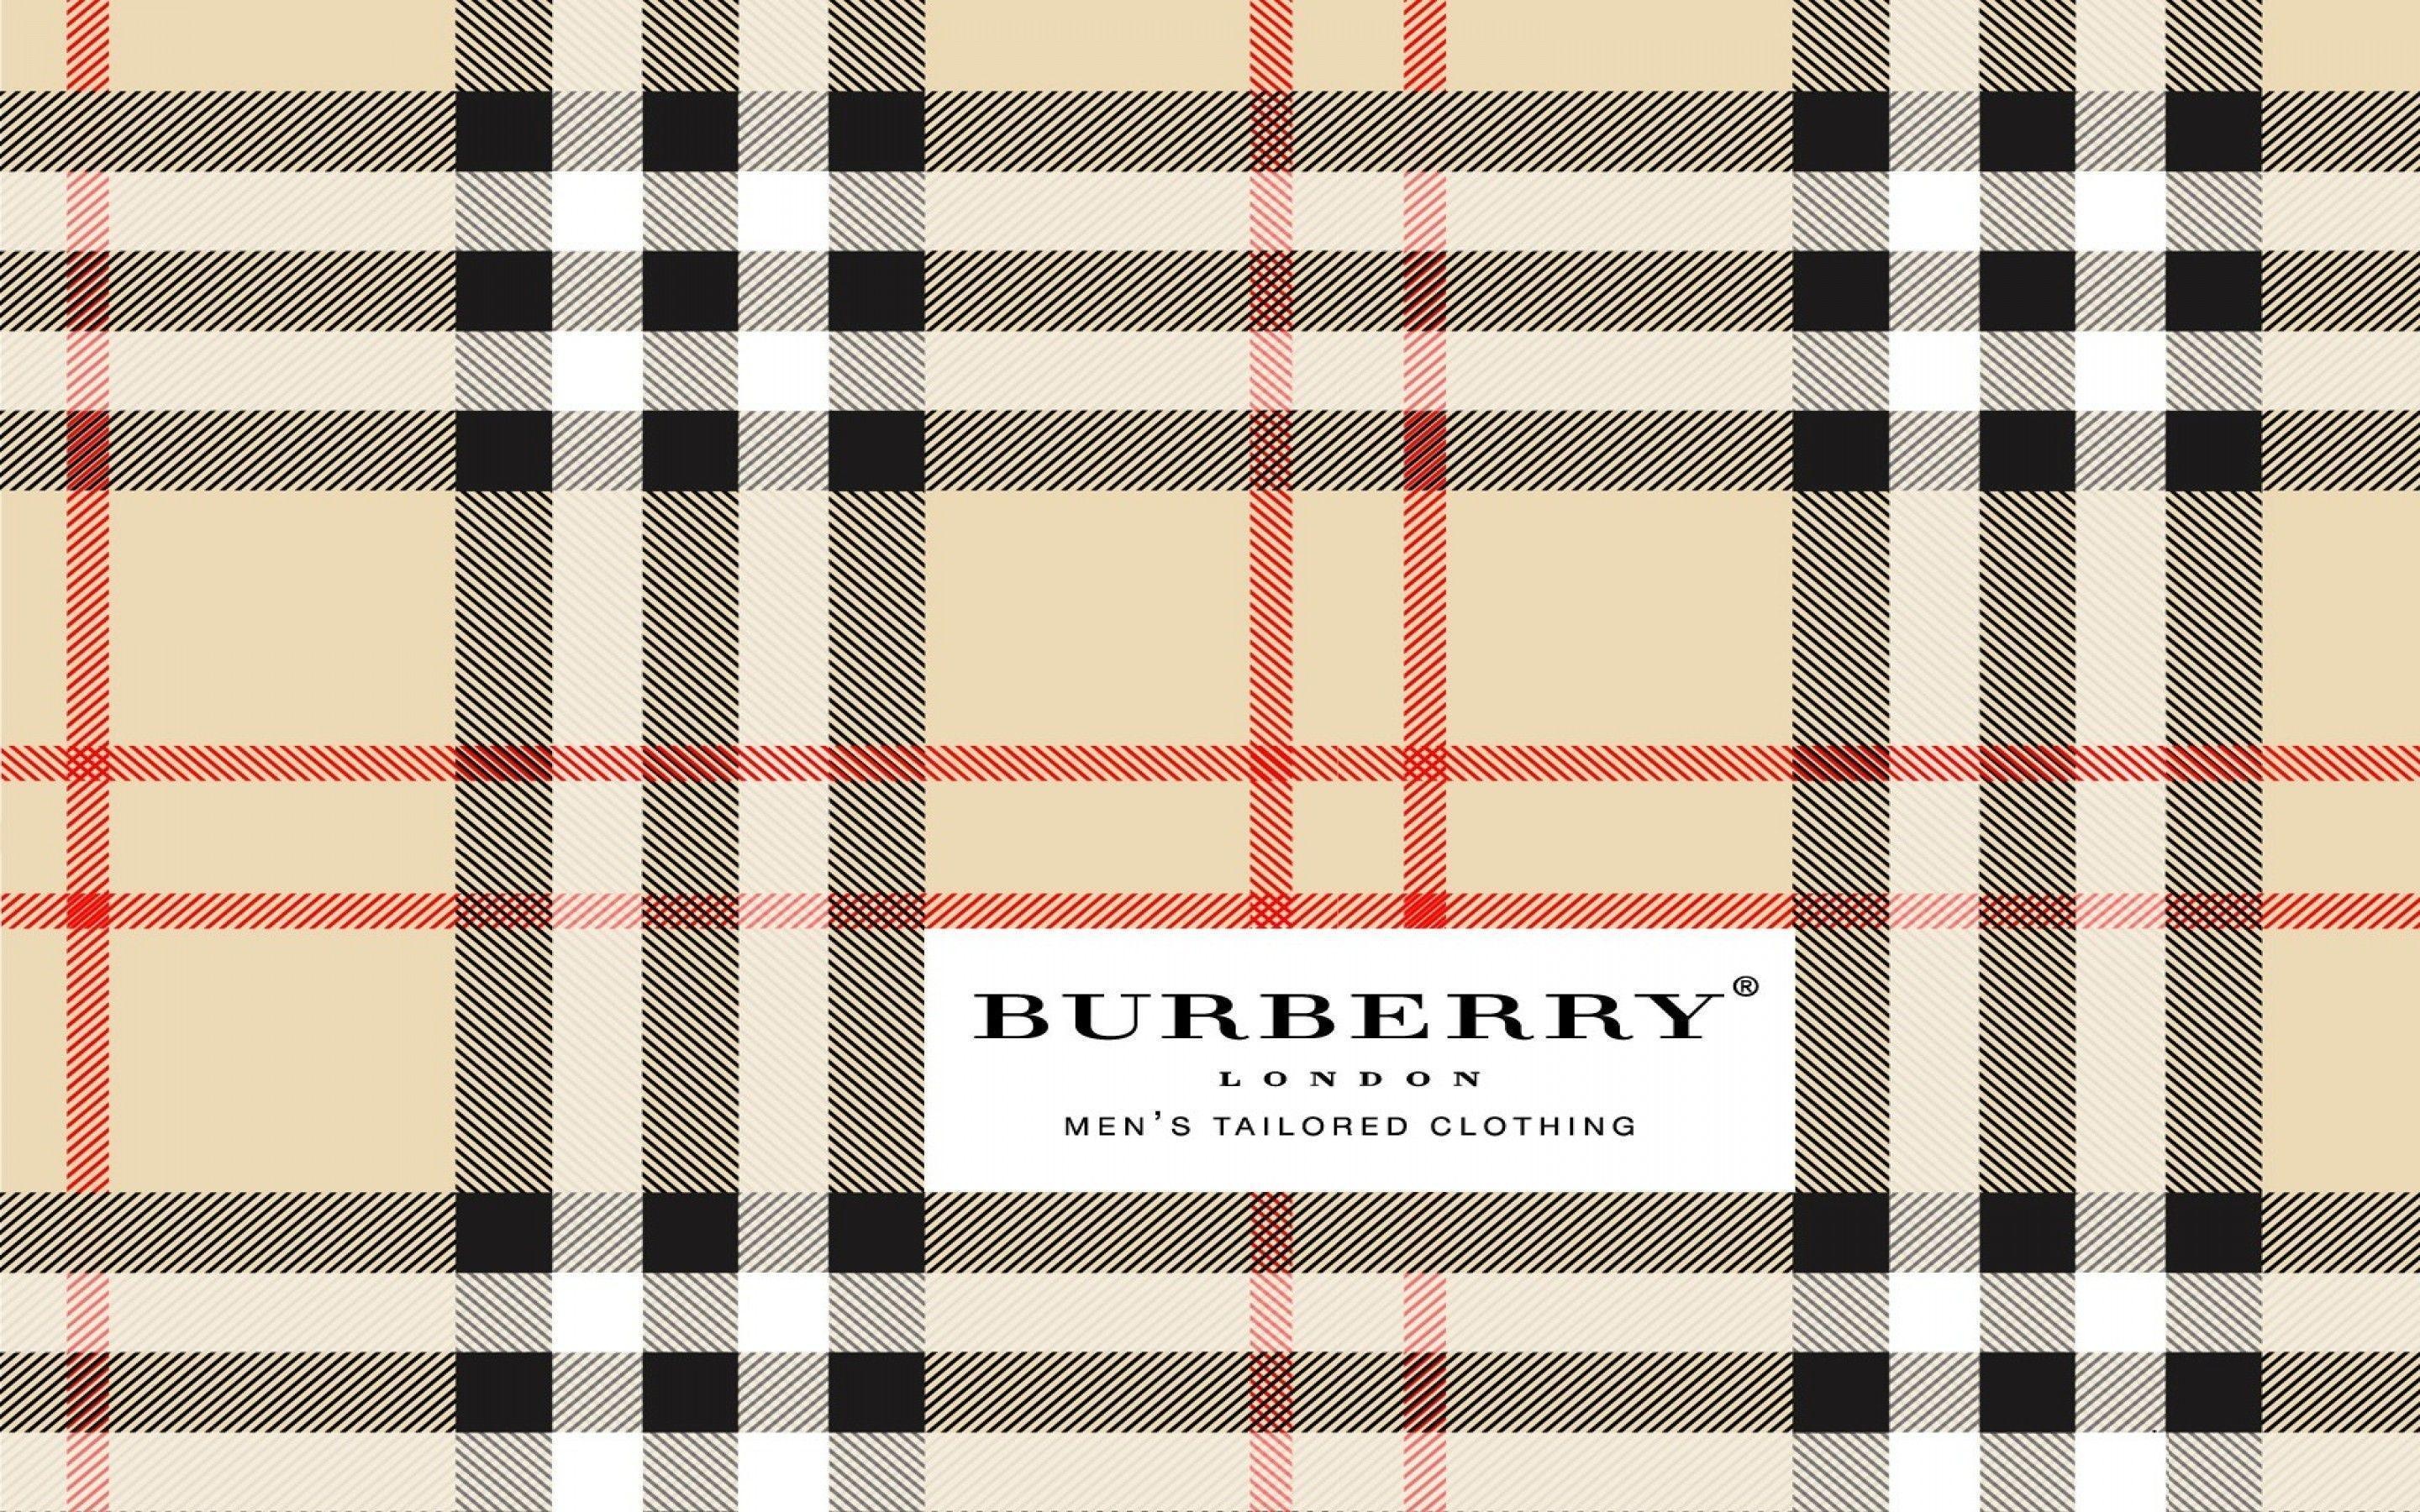 Burberry: The house's iconic check pattern, A brand associated with Britain’s upper class. 2880x1800 HD Wallpaper.